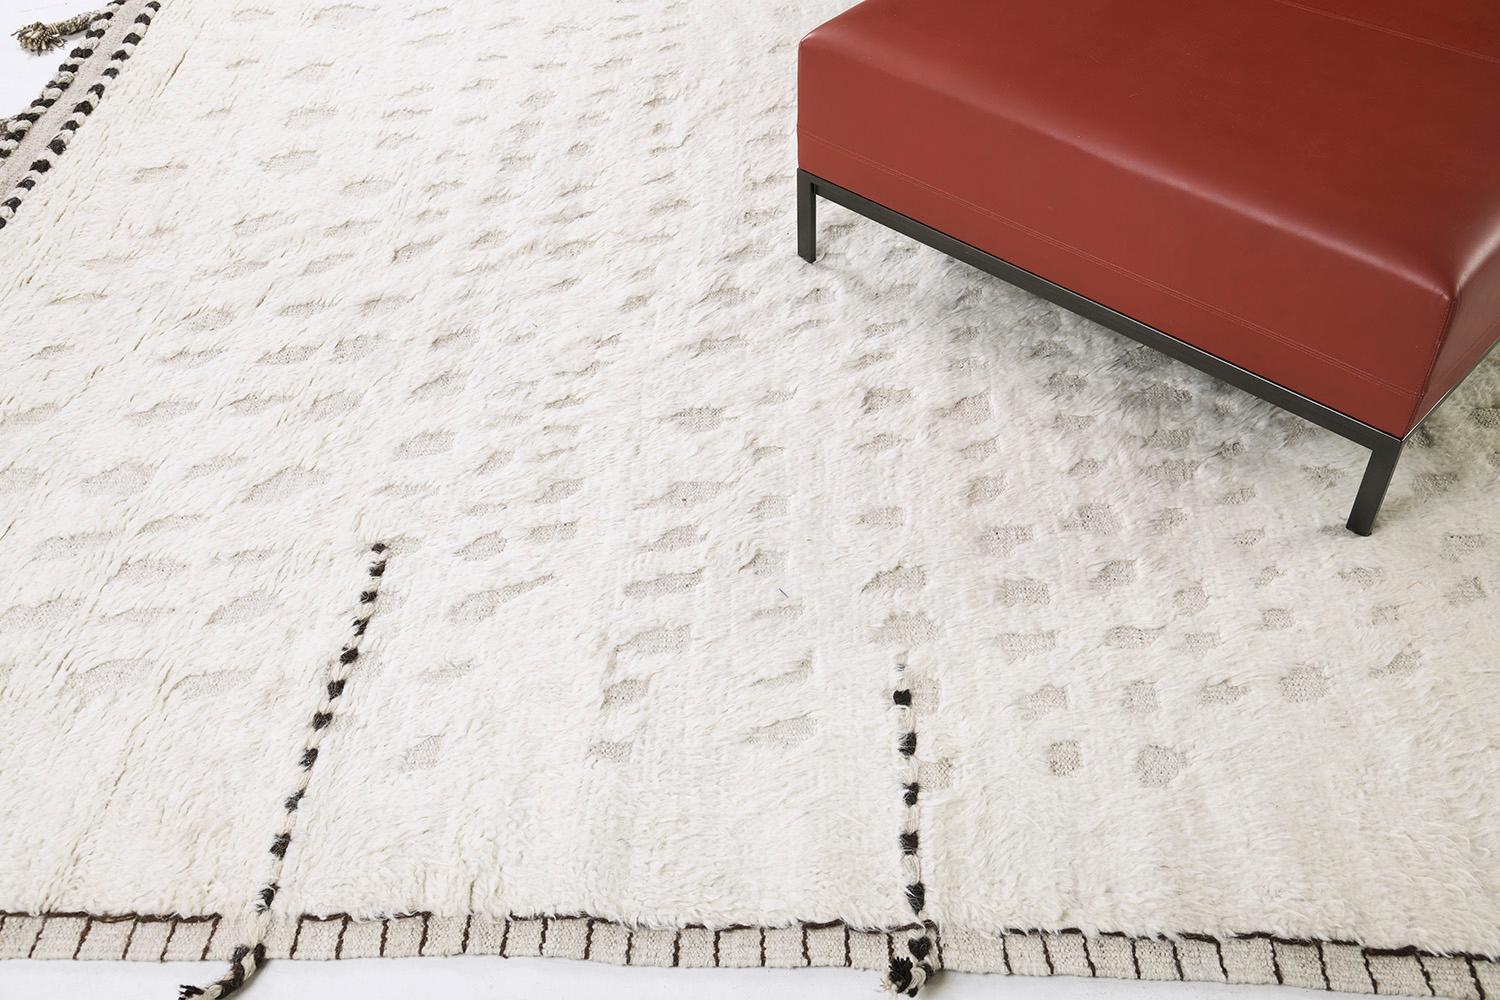 Olea' is a hand-knotted wool shag rug built on a flat-weave base. Tassel detailing run along the sides with dark stitch marks. This playful piece has a perfectly white foundation with round embossed details filling in the space and playing with the